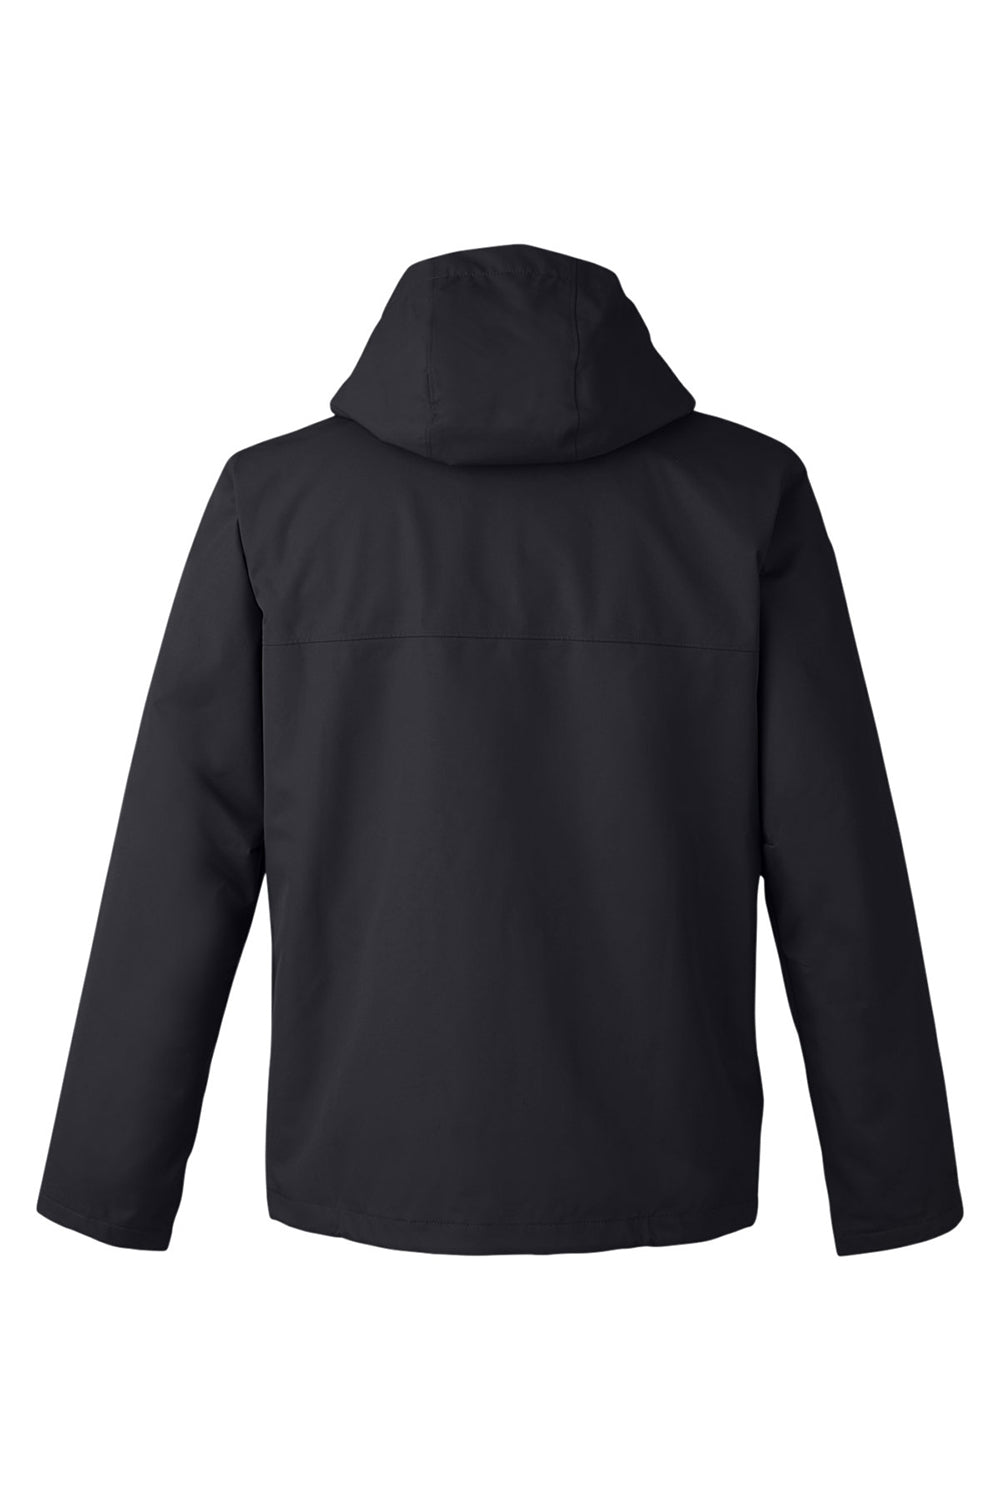 Under Armour 1371585 Mens Porter 2.0 Moisture Wicking 3-In-1 Full Zip Hooded Jacket Black/Pitch Grey Flat Back